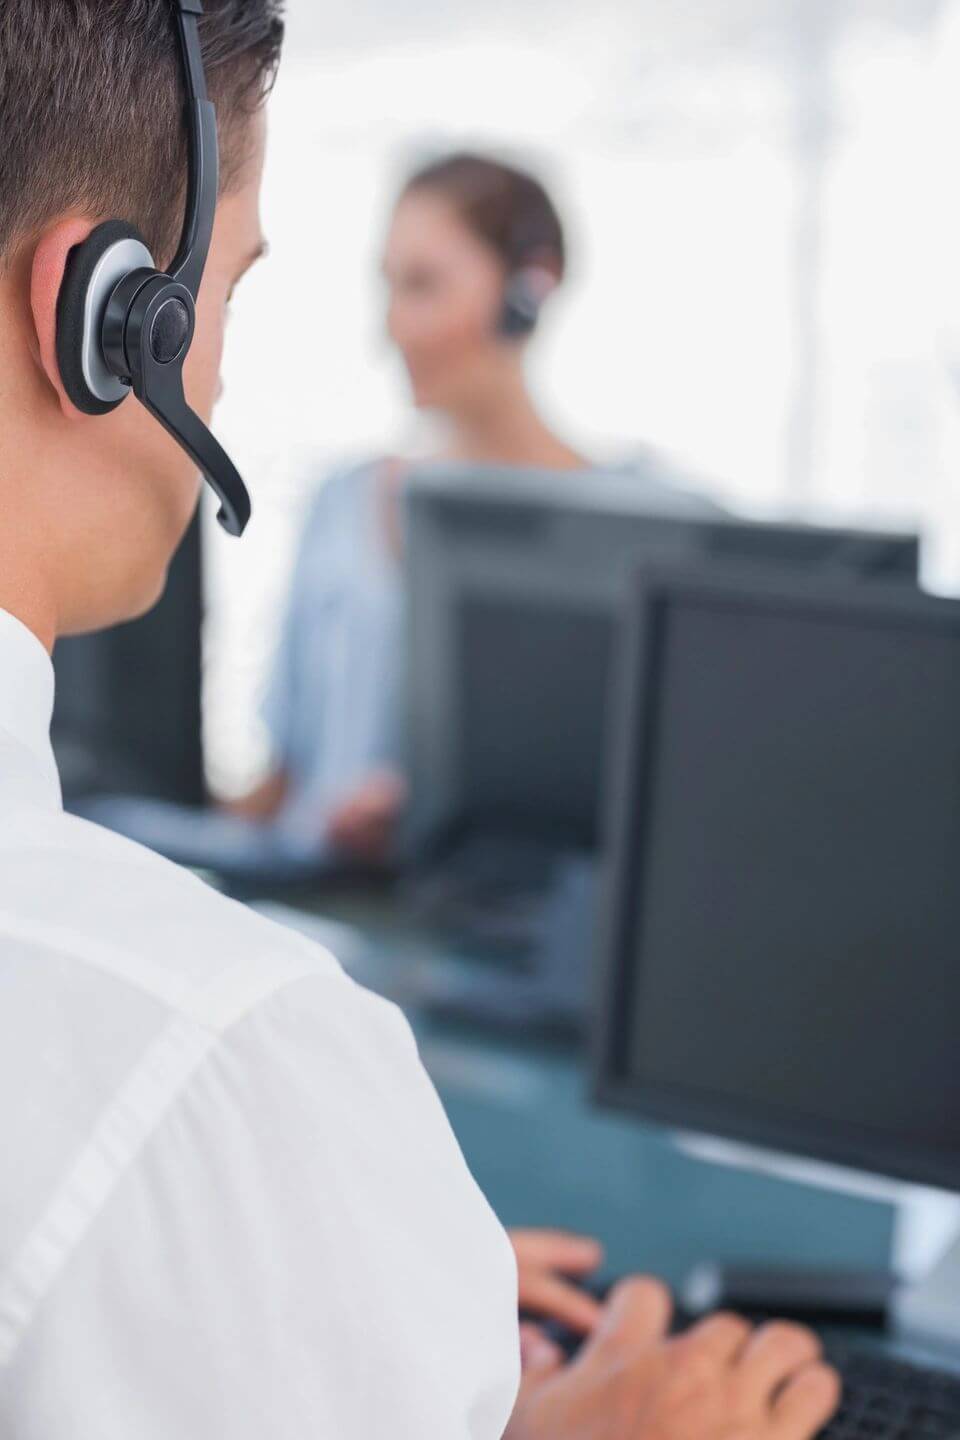 Call center agent sitting at his work desk with headset on, focusing on a computer screen.